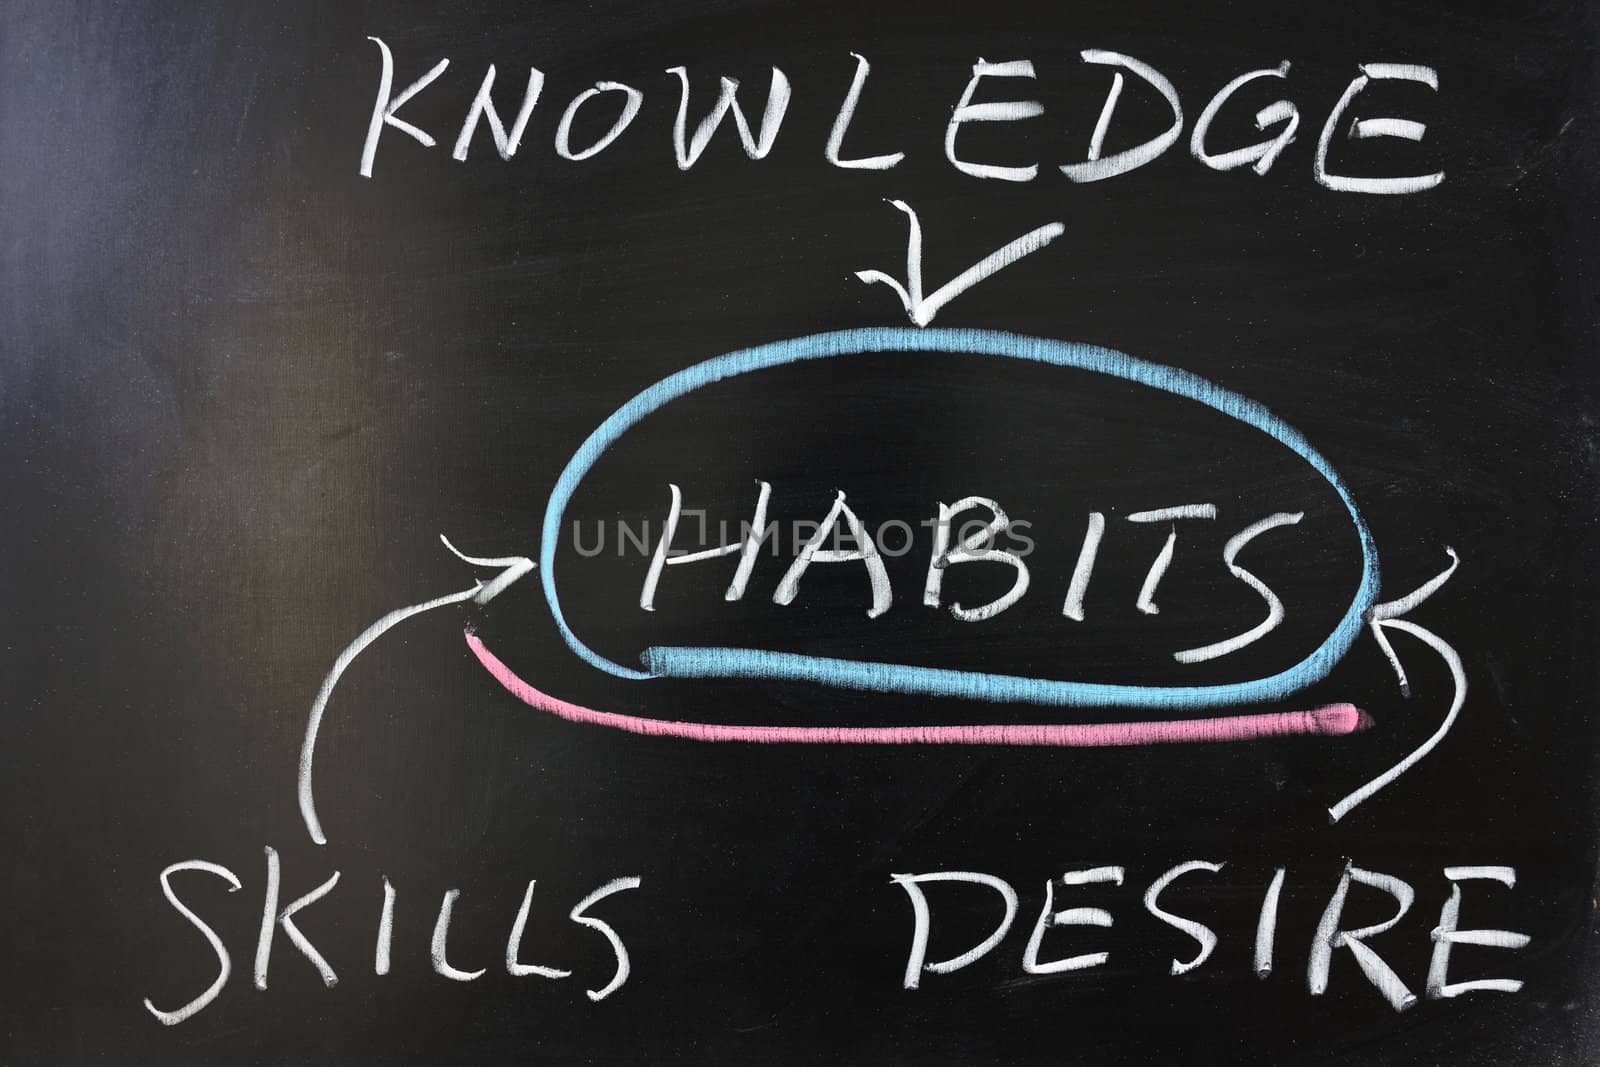 Relationship between habits and knowledge, skills, desire by raywoo